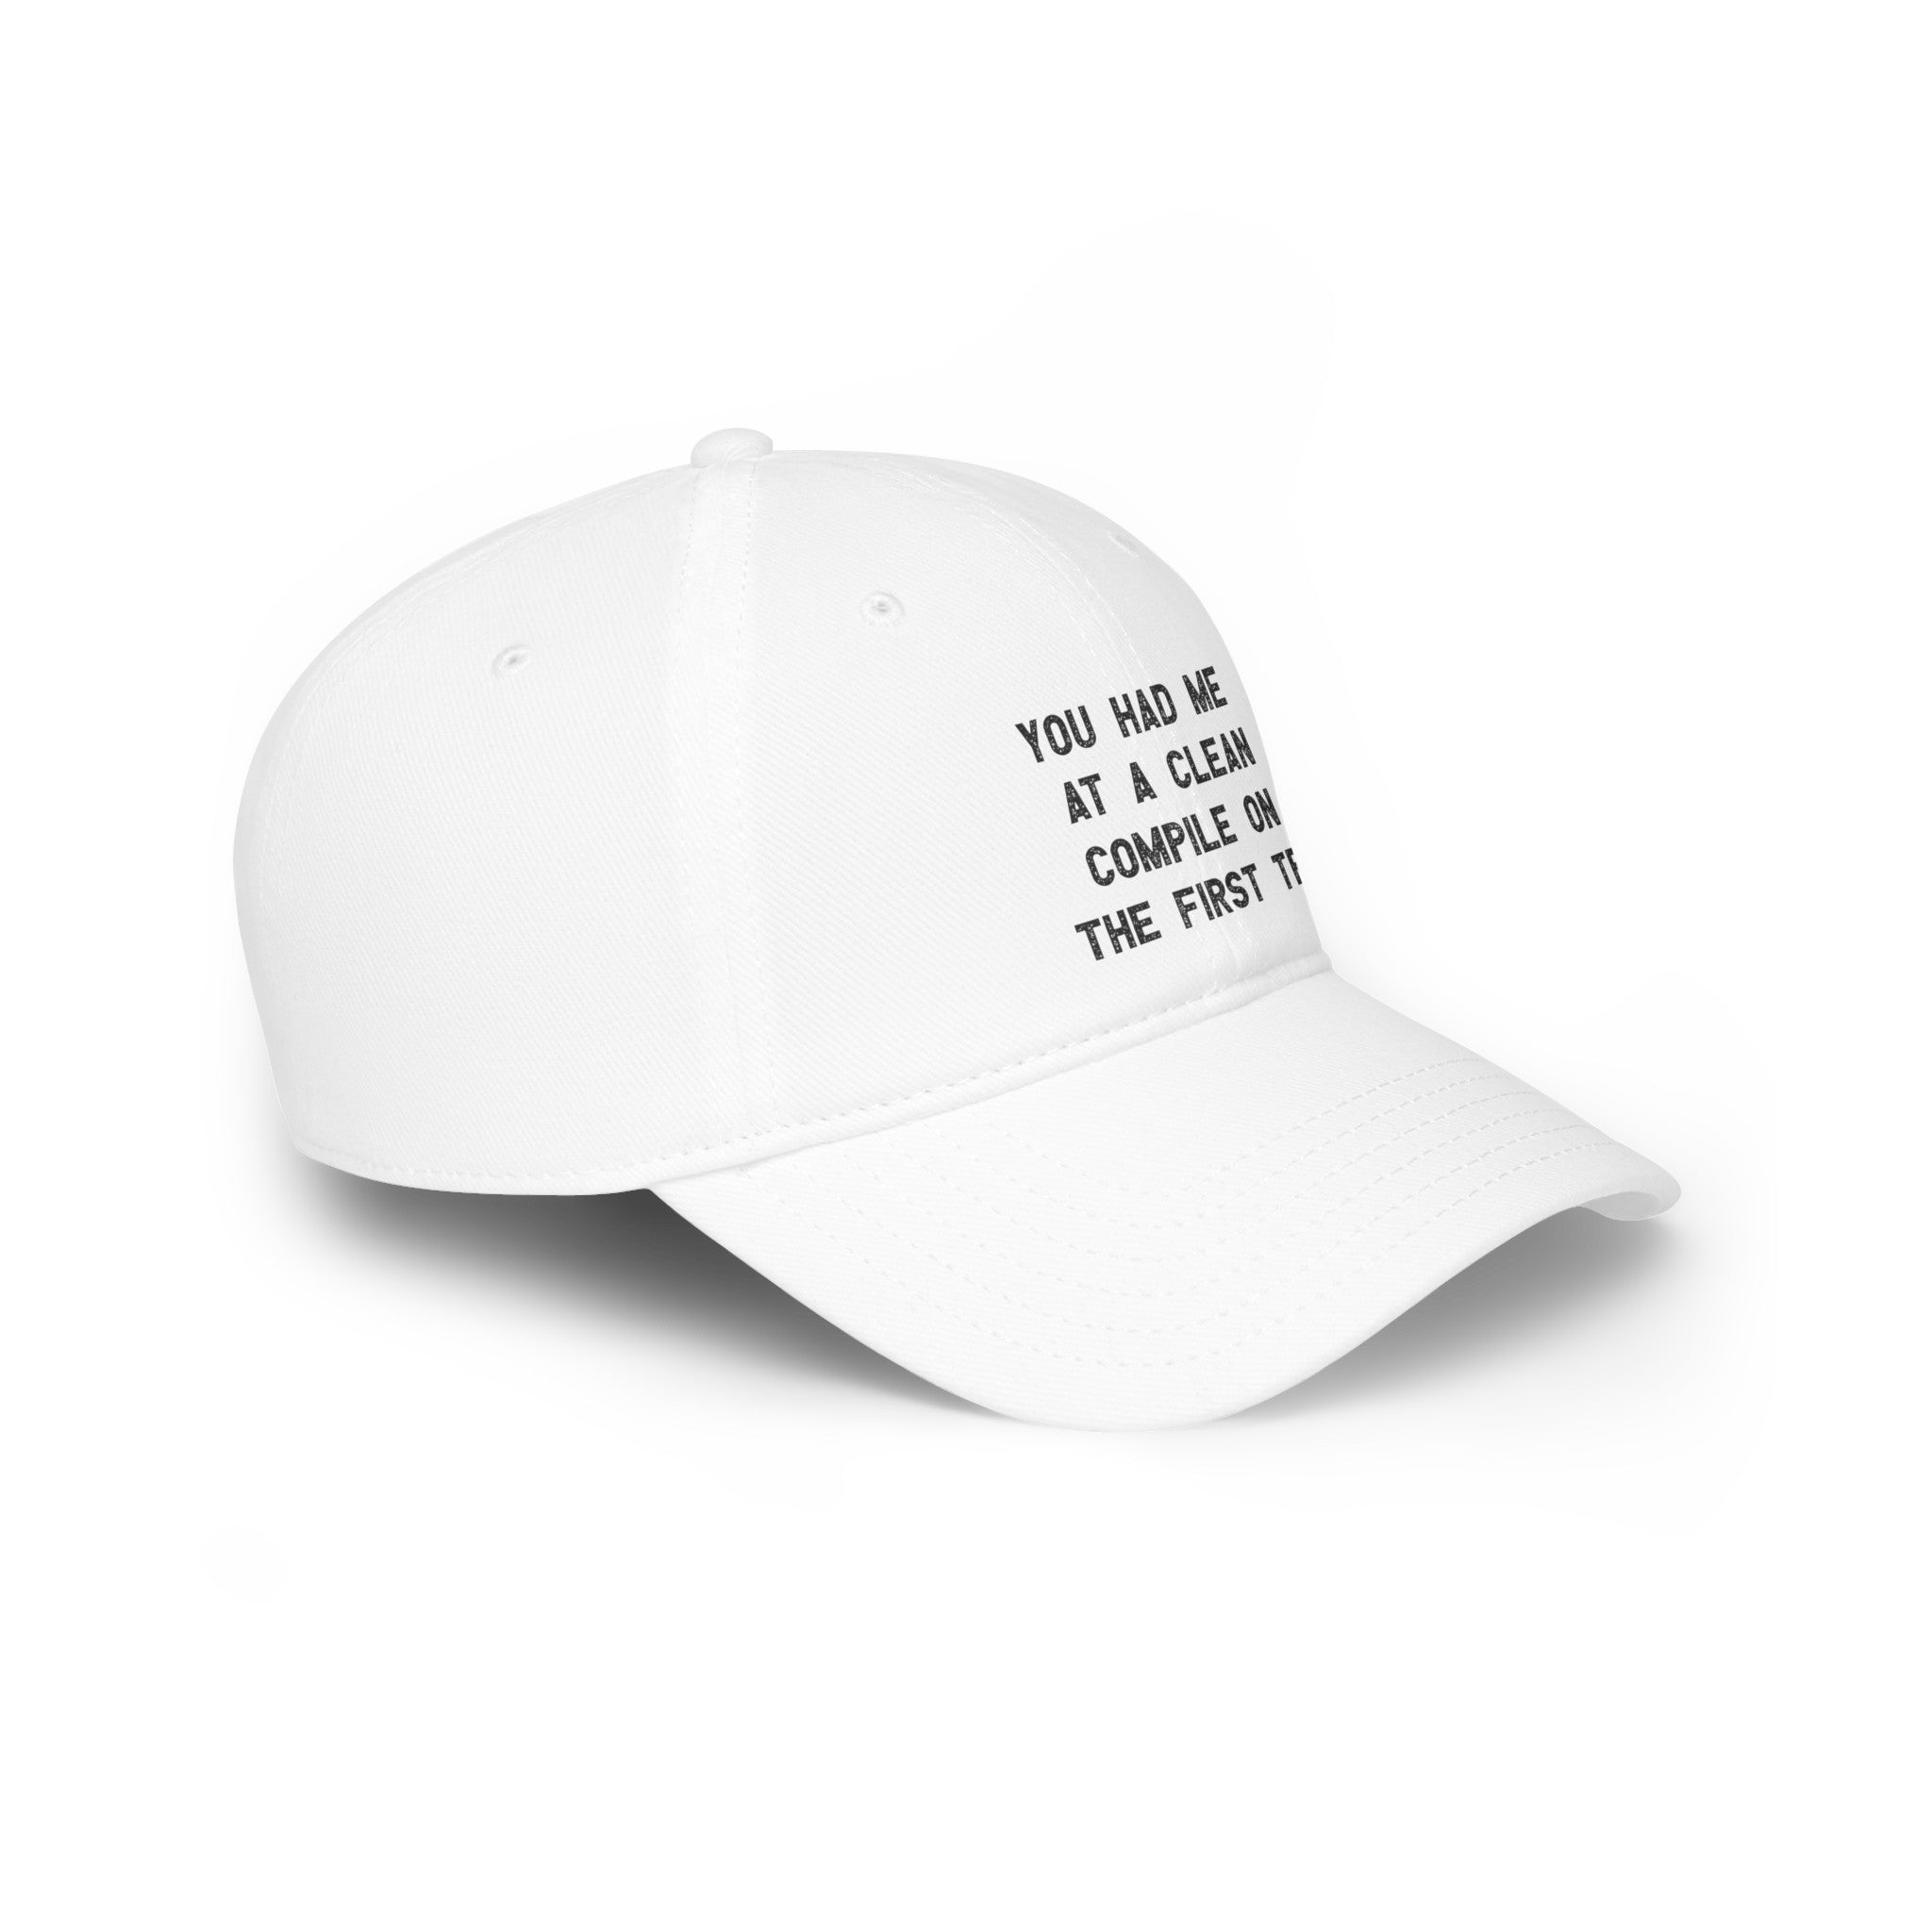 A white You Had Me At a Clean Compile on the First Try - Hat with black text reading "You had me at a clean compile on the first try" embroidered on the front, featuring reinforced stitching for durability. Perfect for those who appreciate coder lingo and a flawless execution.